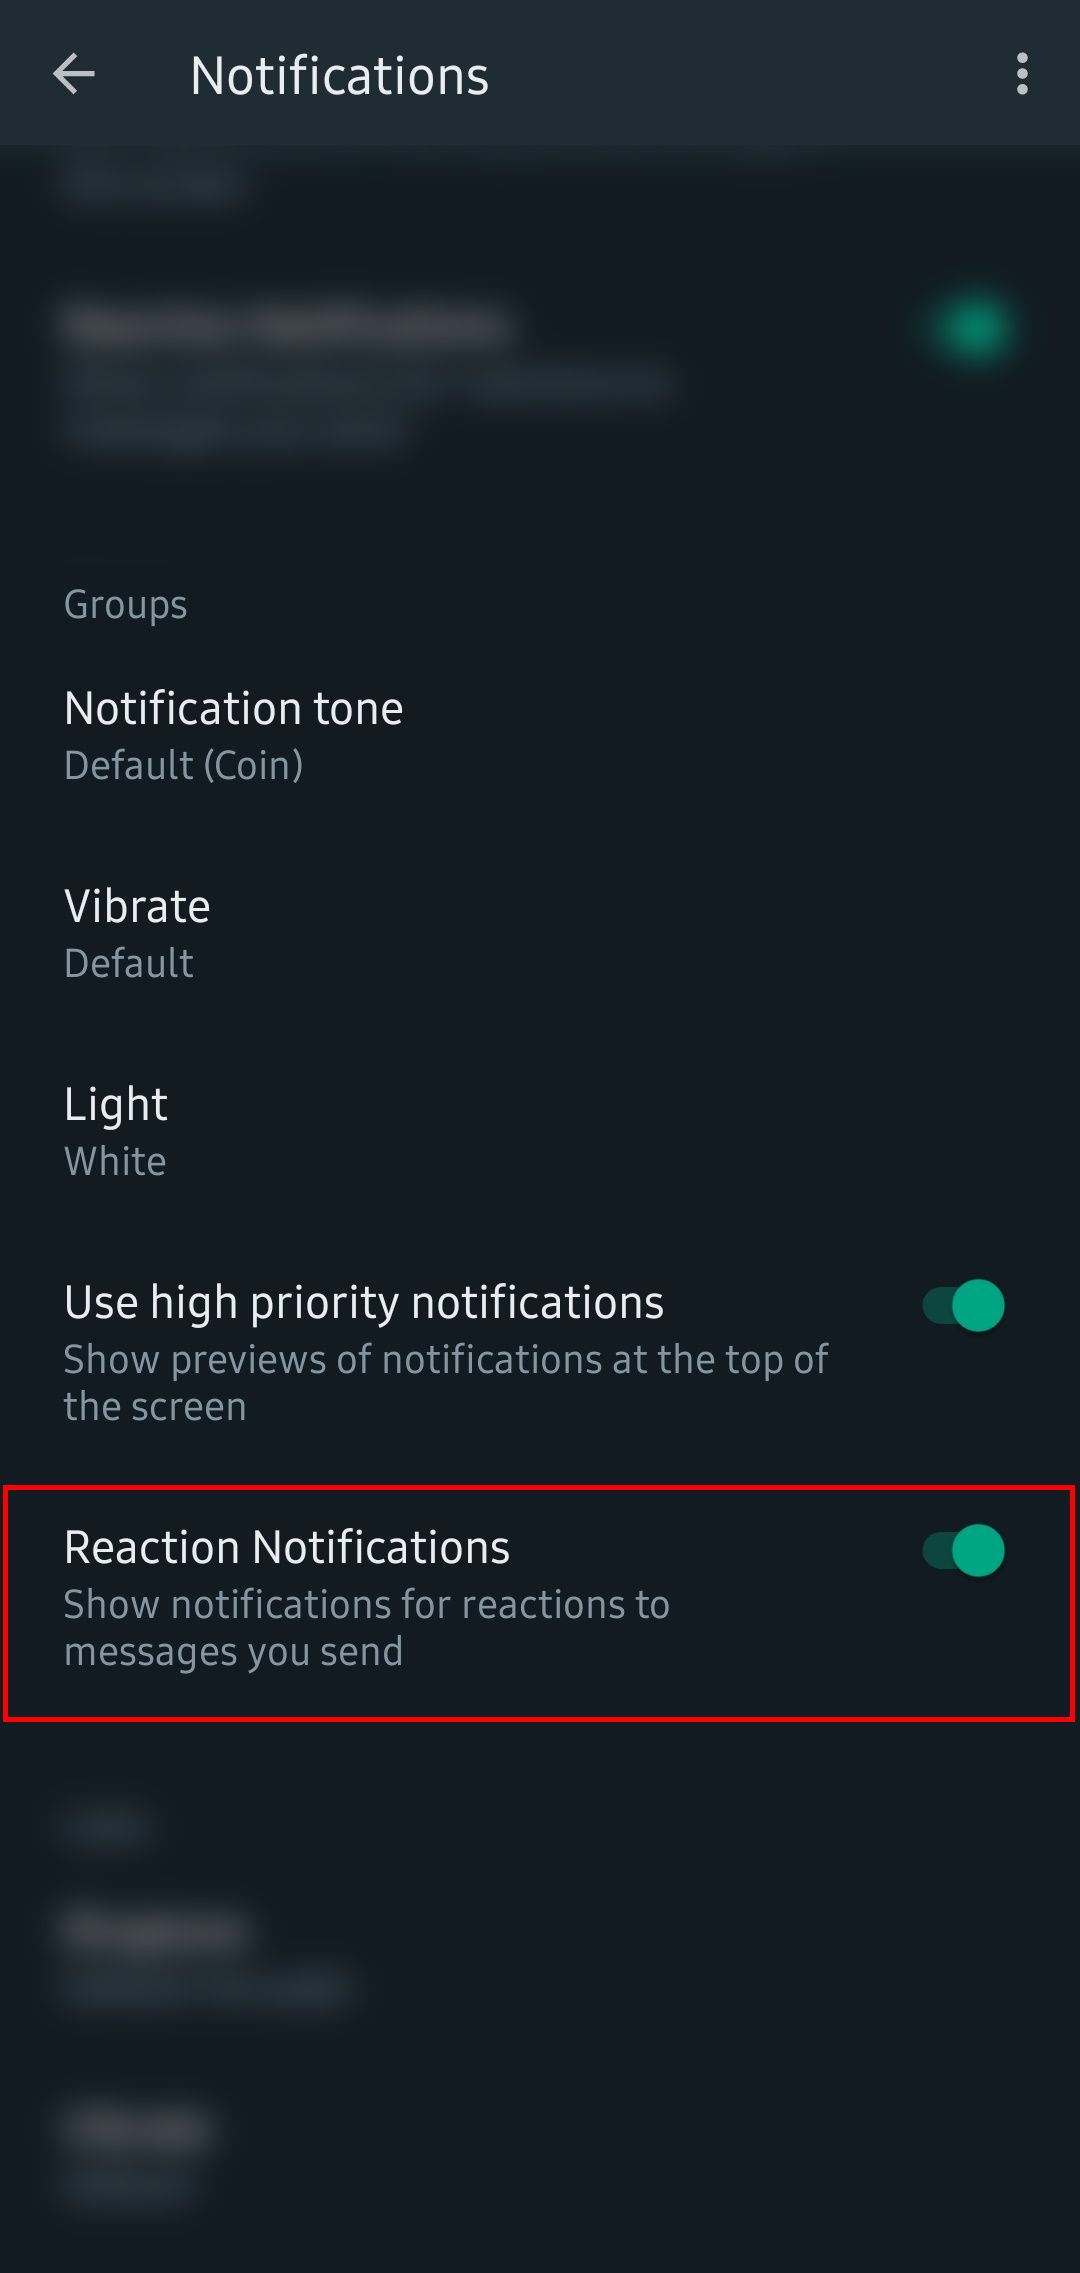 whatsapp notifications options with the reaction notifications enabled in groups